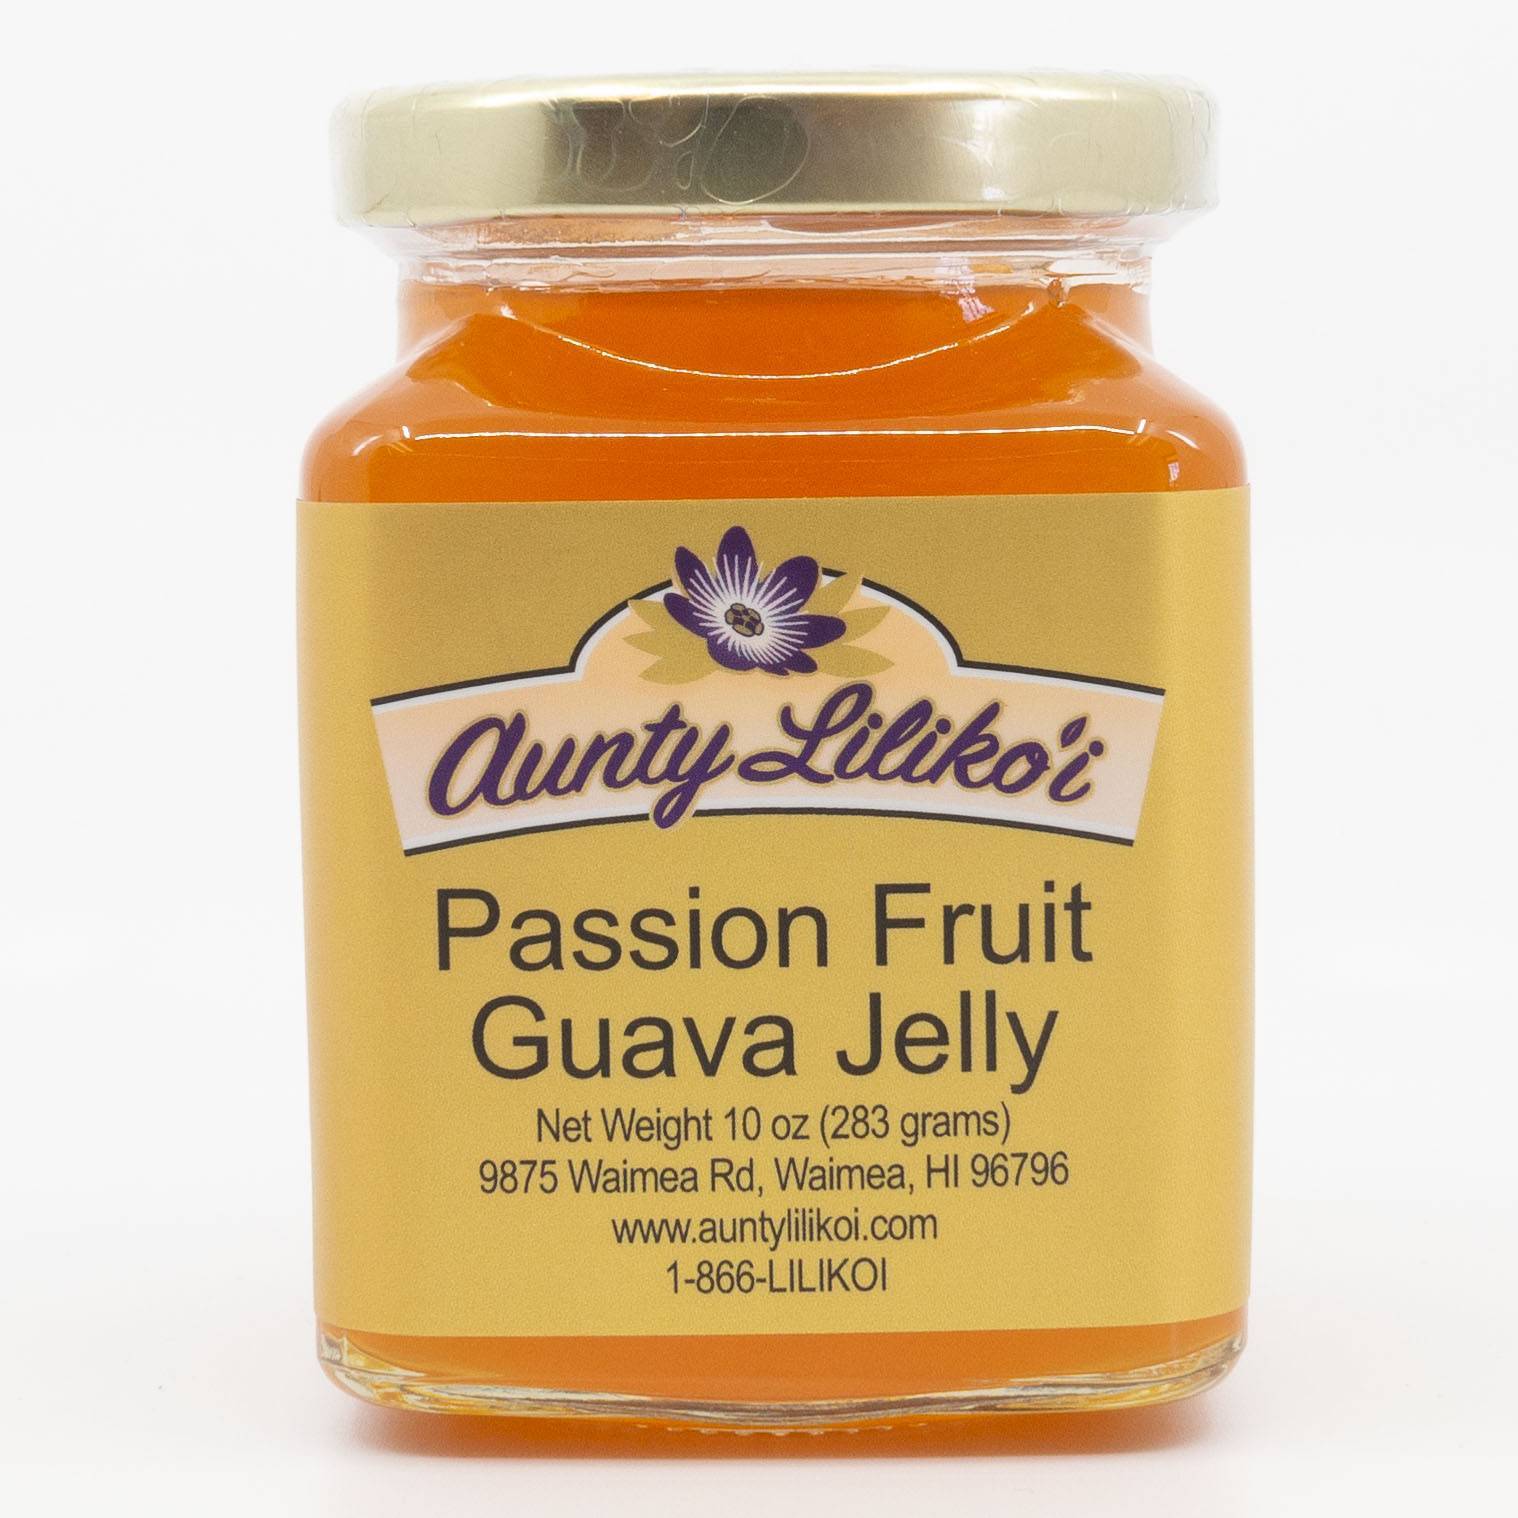 Top 13 Best Hawaiian Souvenirs to Bring Home featured by top US Hawaii blog, Hawaii Travel with Kids: Aunty Lilikoi Passion Fruit Guava Jelly from Hawaii